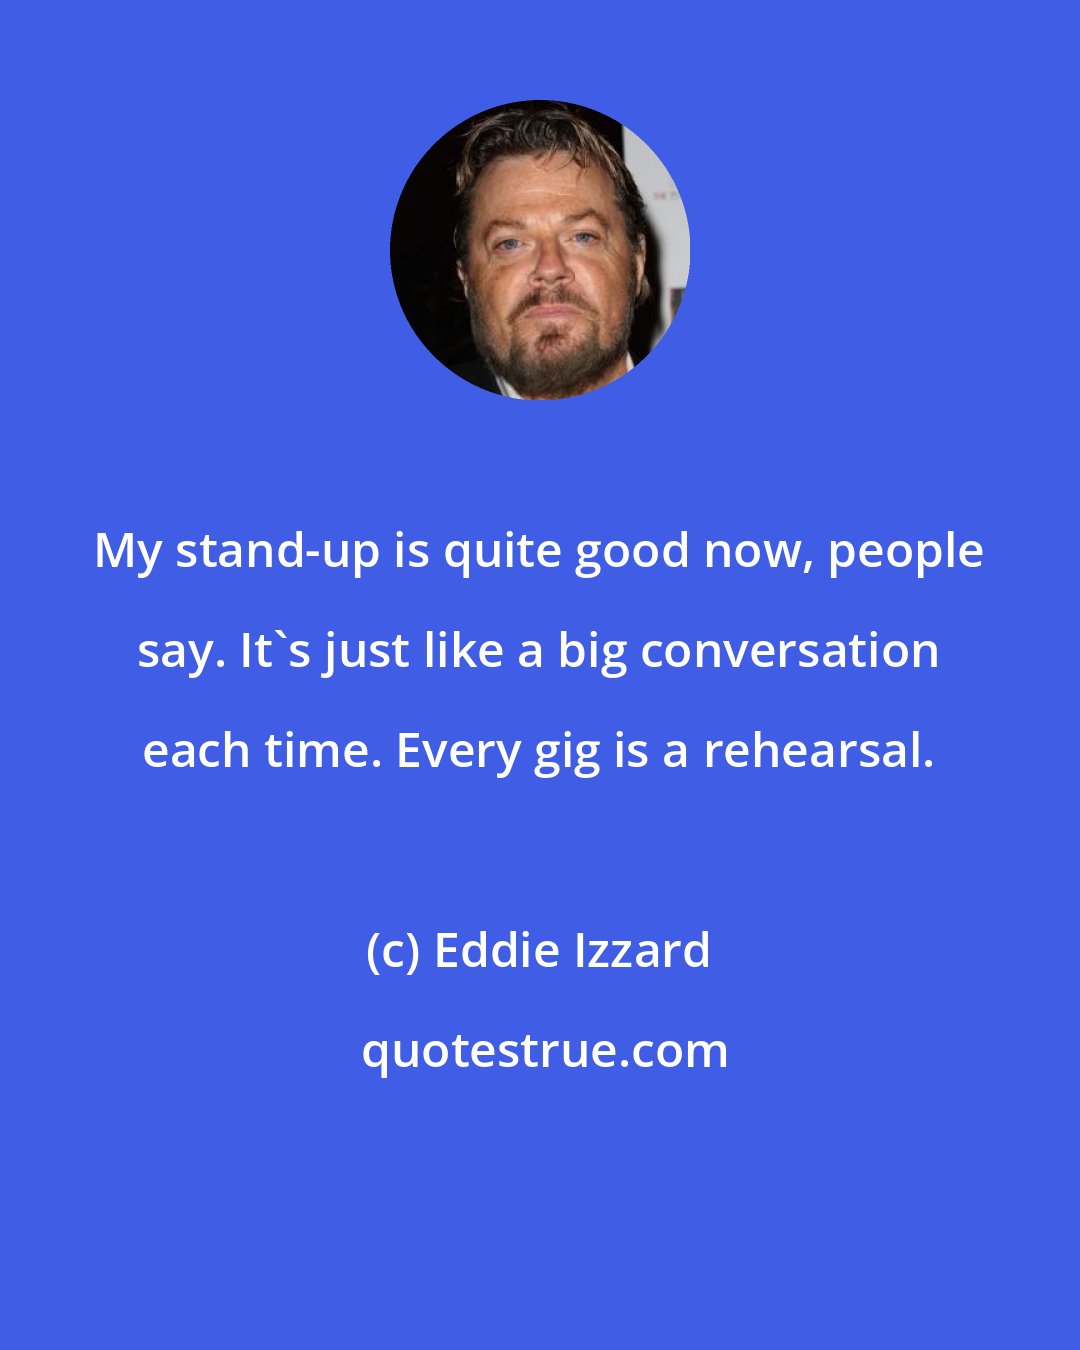 Eddie Izzard: My stand-up is quite good now, people say. It's just like a big conversation each time. Every gig is a rehearsal.